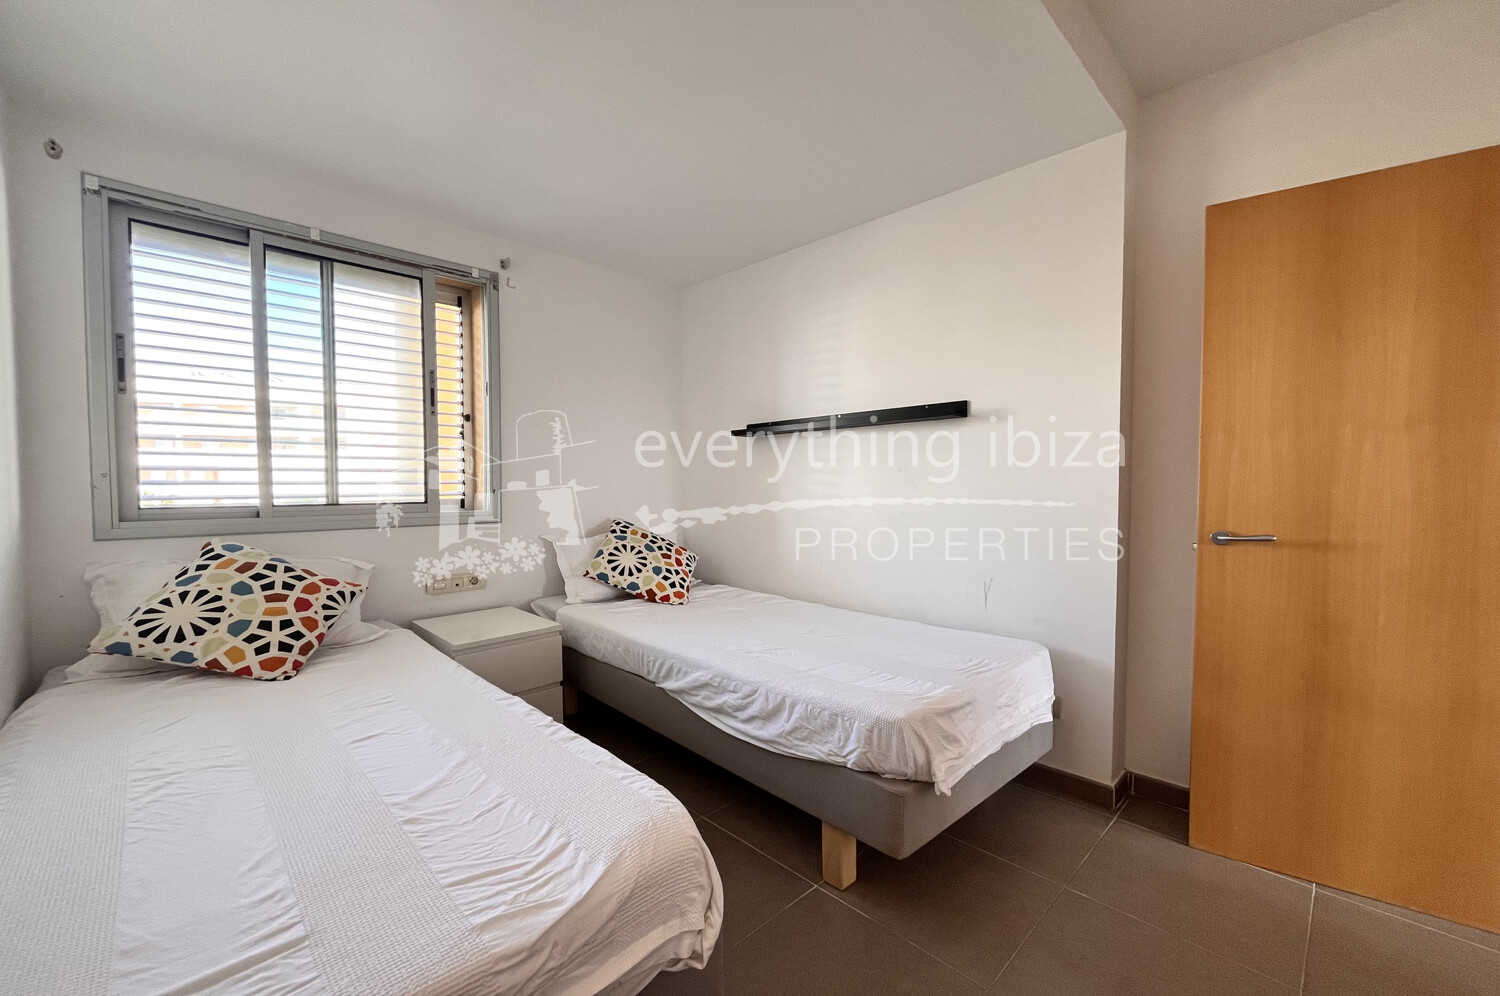 Beachfront Contemporary Apartment Close to the Coastline & Beaches, ref. 1701, for sale in Ibiza by everything ibiza Properties